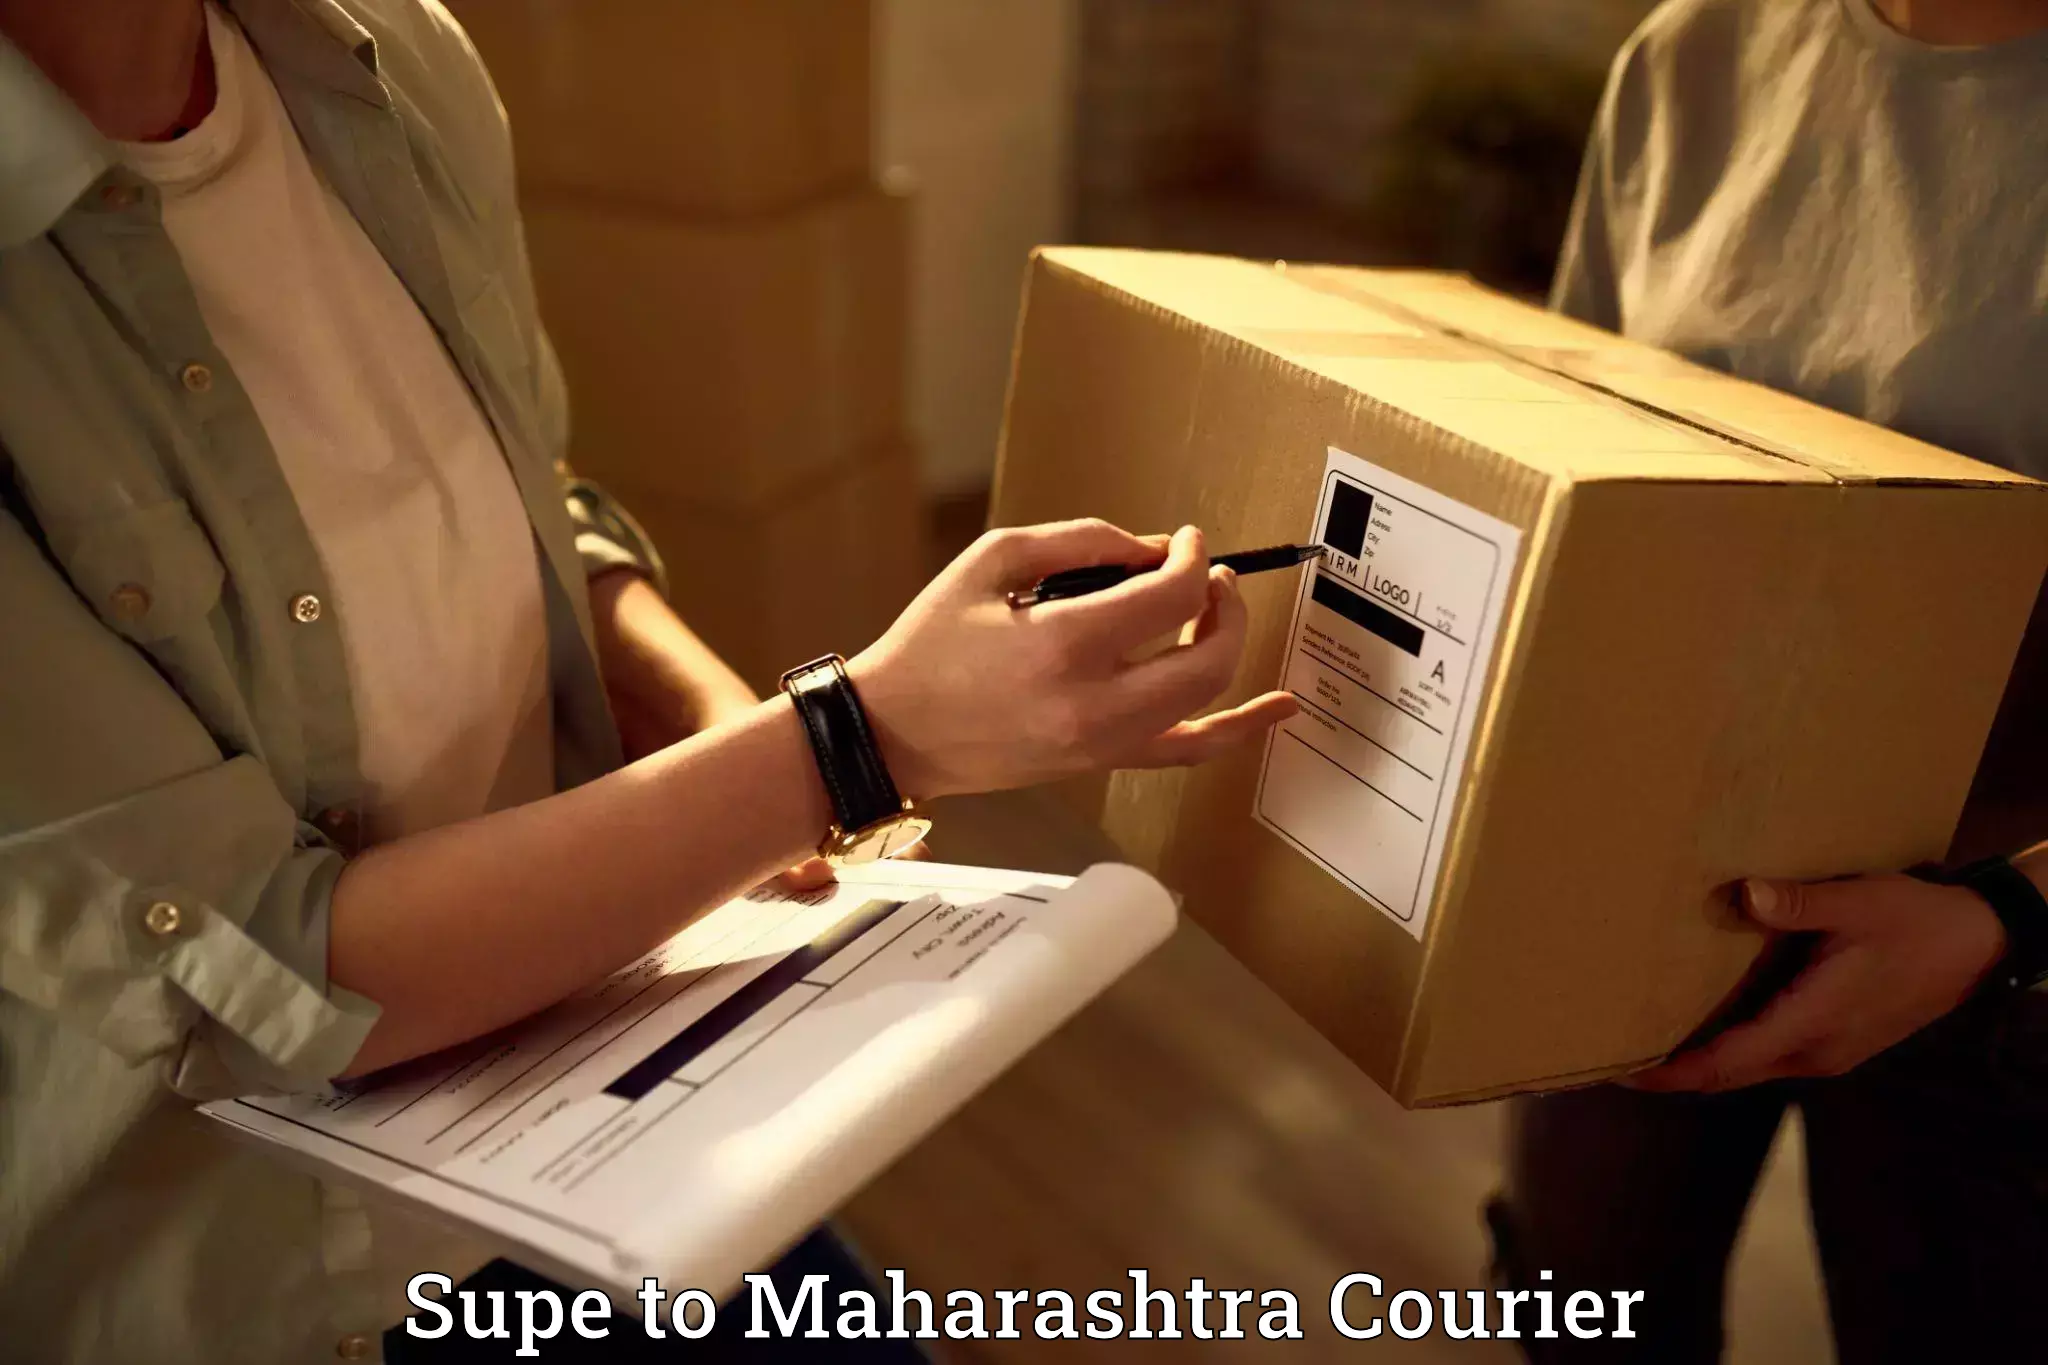 Furniture delivery service Supe to Ahmednagar